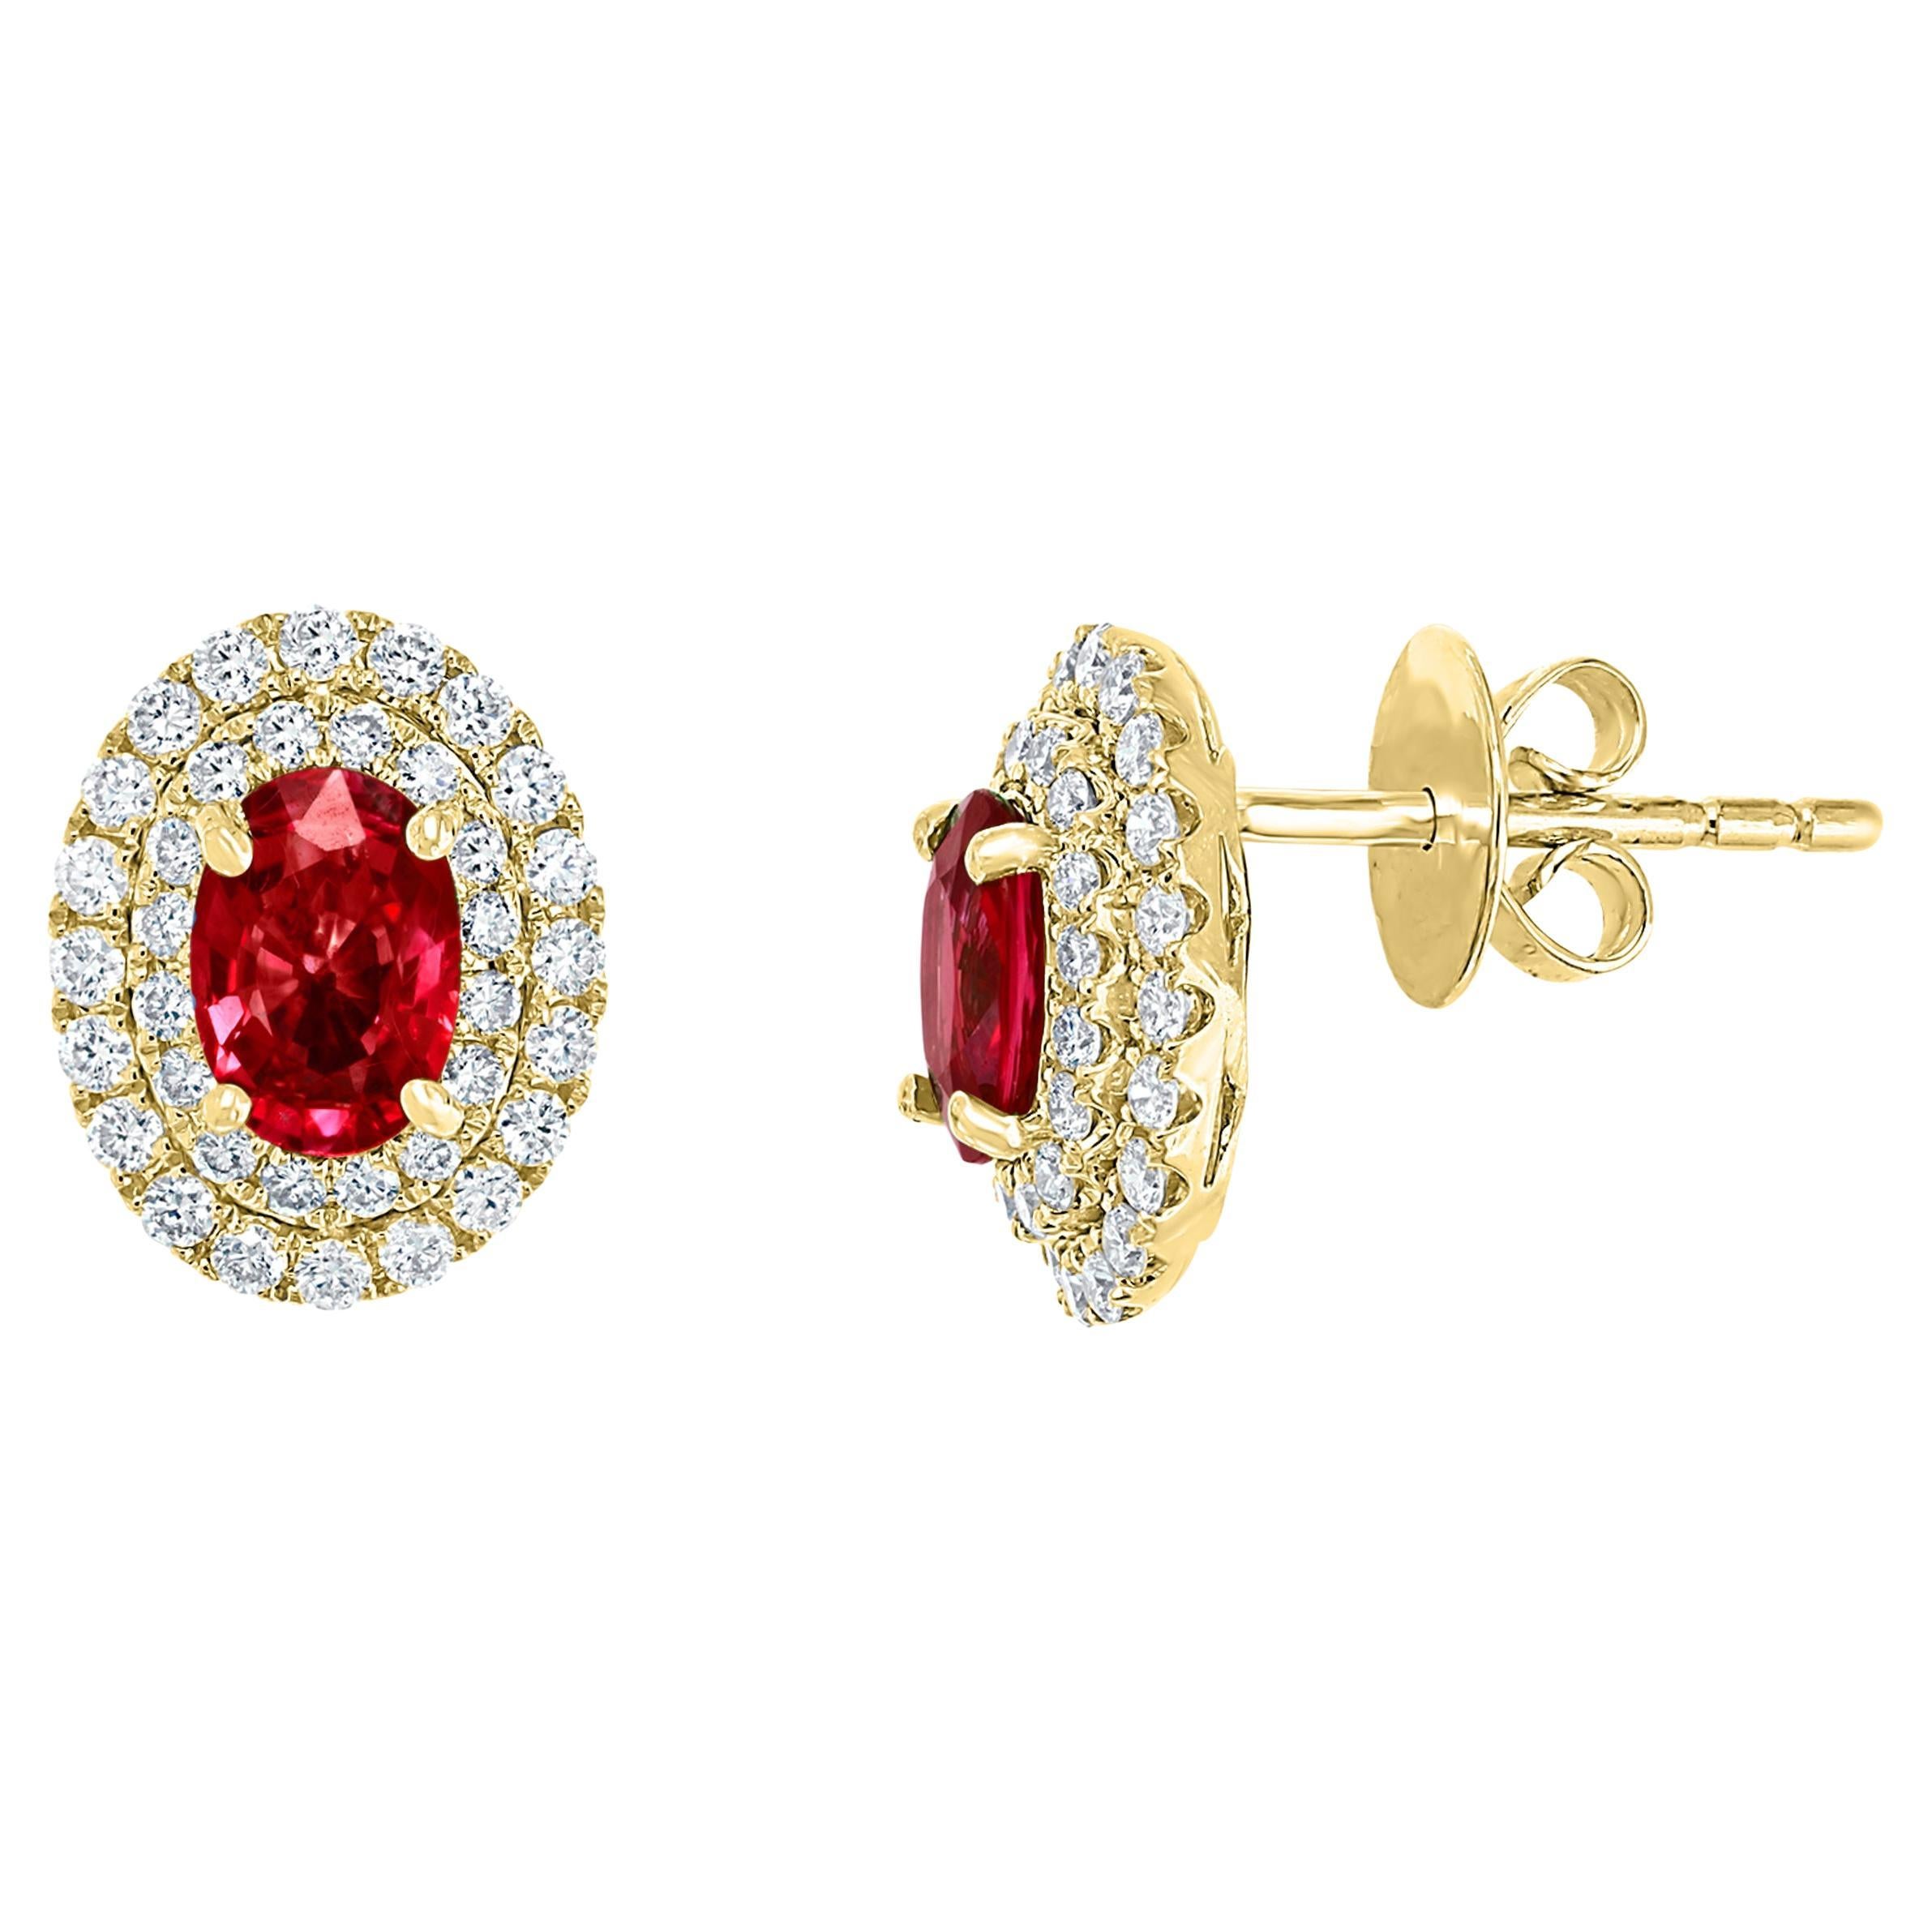 0.98 Carat Oval Cut Ruby and Diamond Stud Earrings in 18K Yellow Gold For Sale